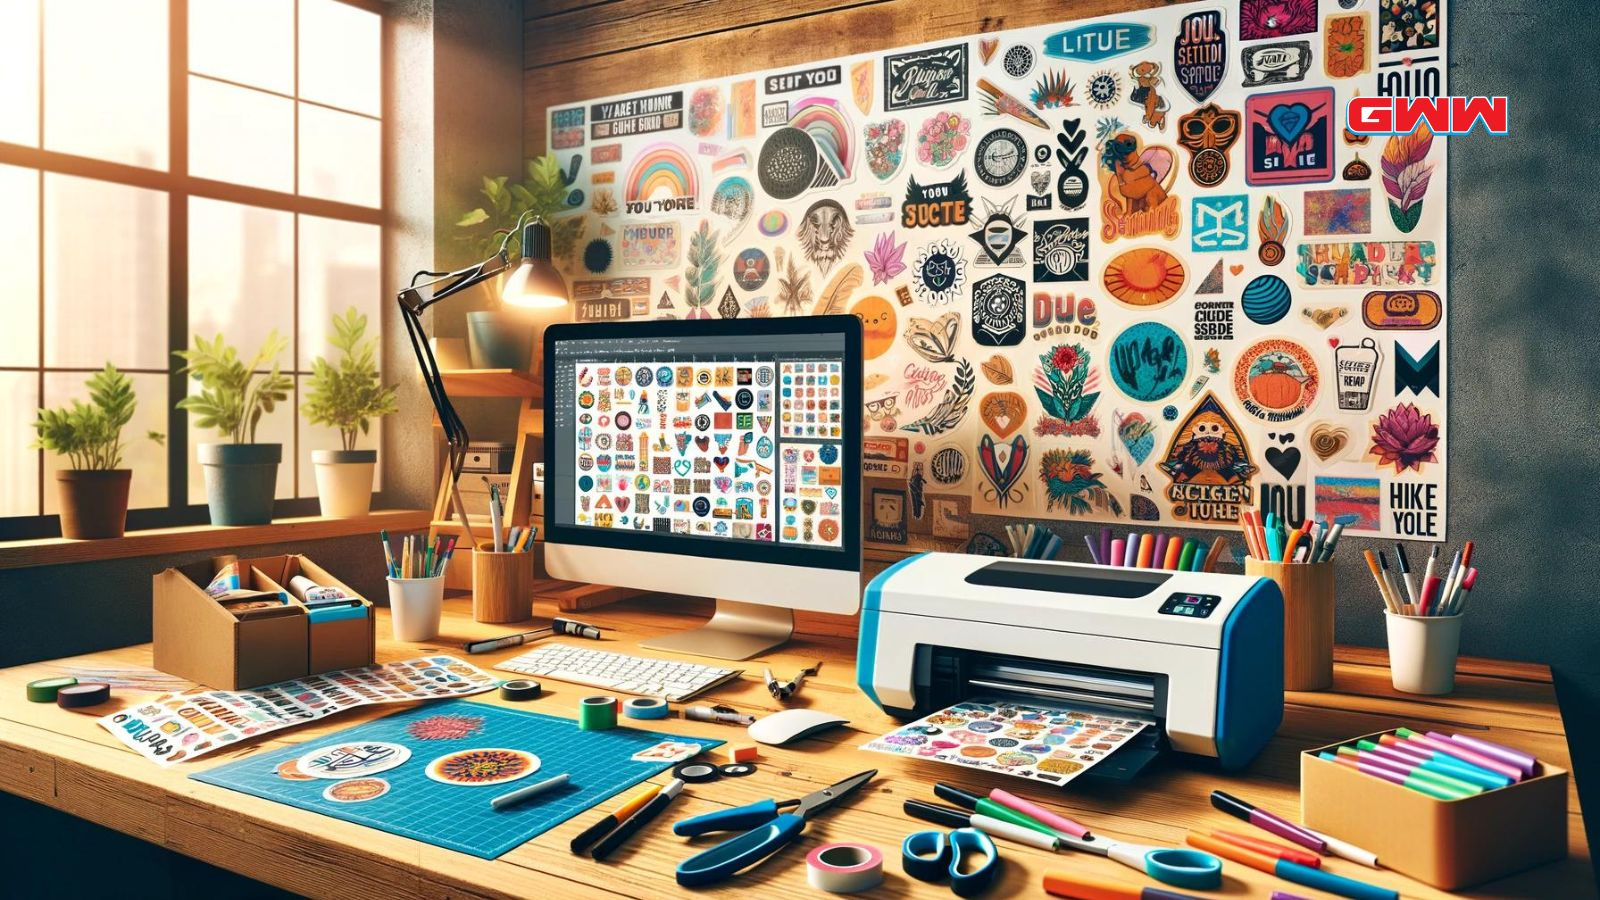 Workspace with computer and printer, colorful stickers displayed on wall